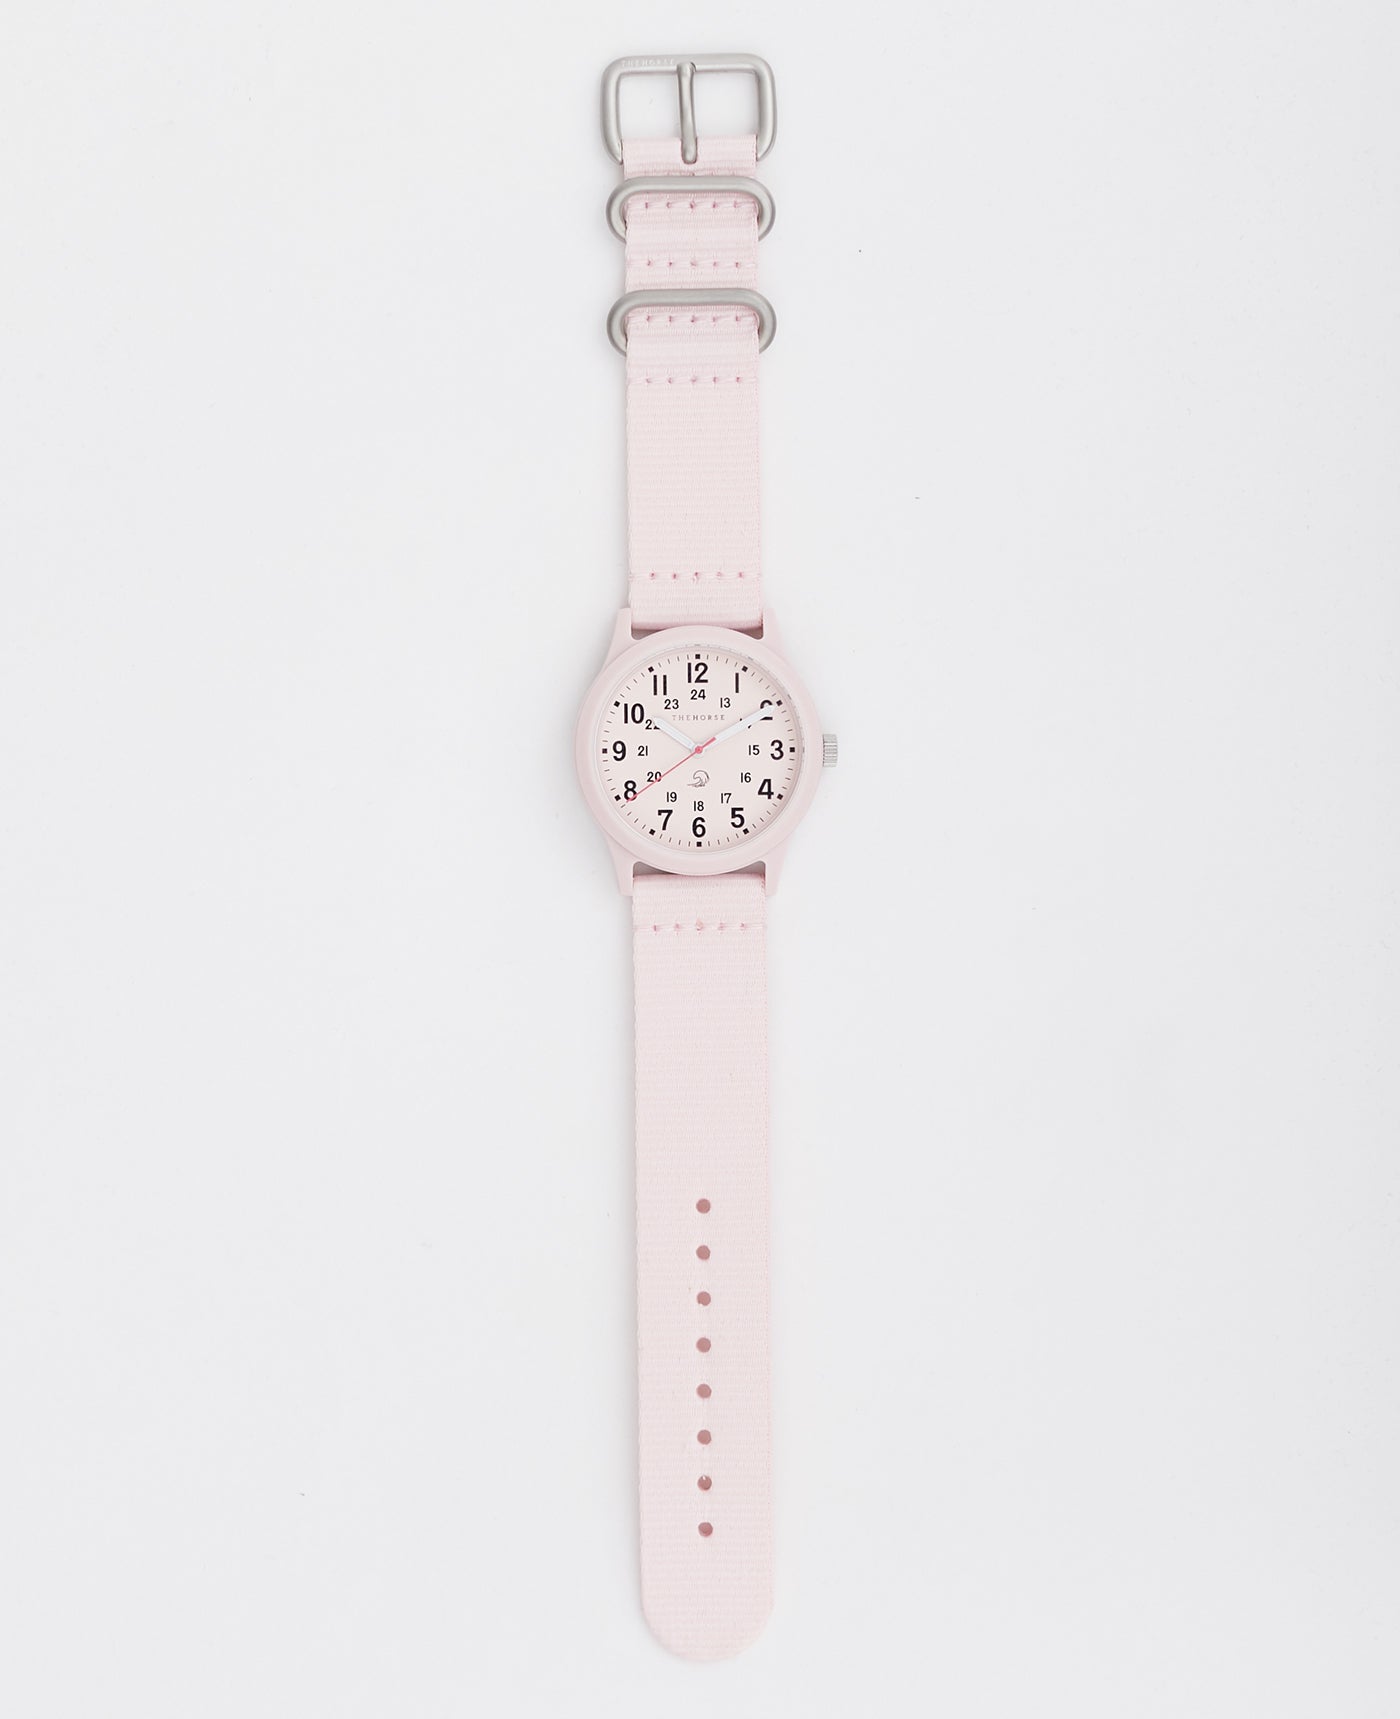 Save Our Seas Recycled Ocean Plastics Watch in Pink by The Horse